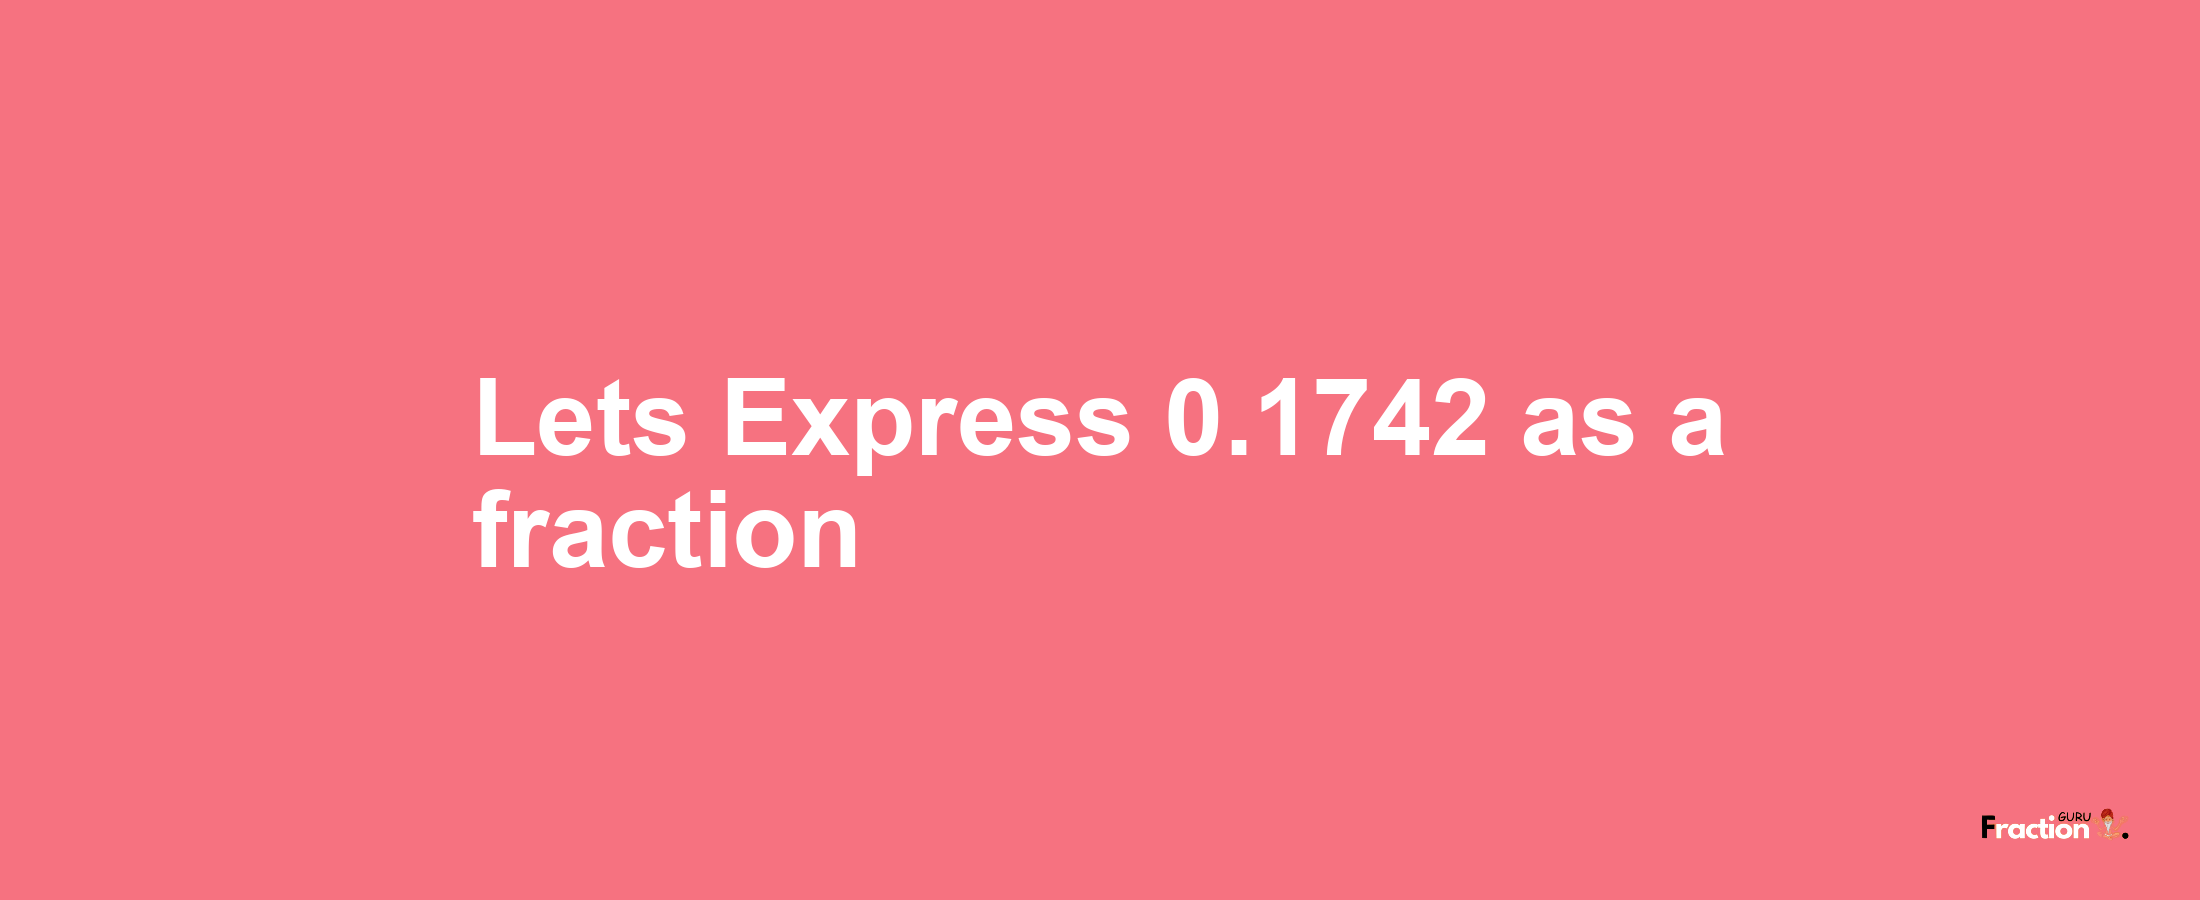 Lets Express 0.1742 as afraction